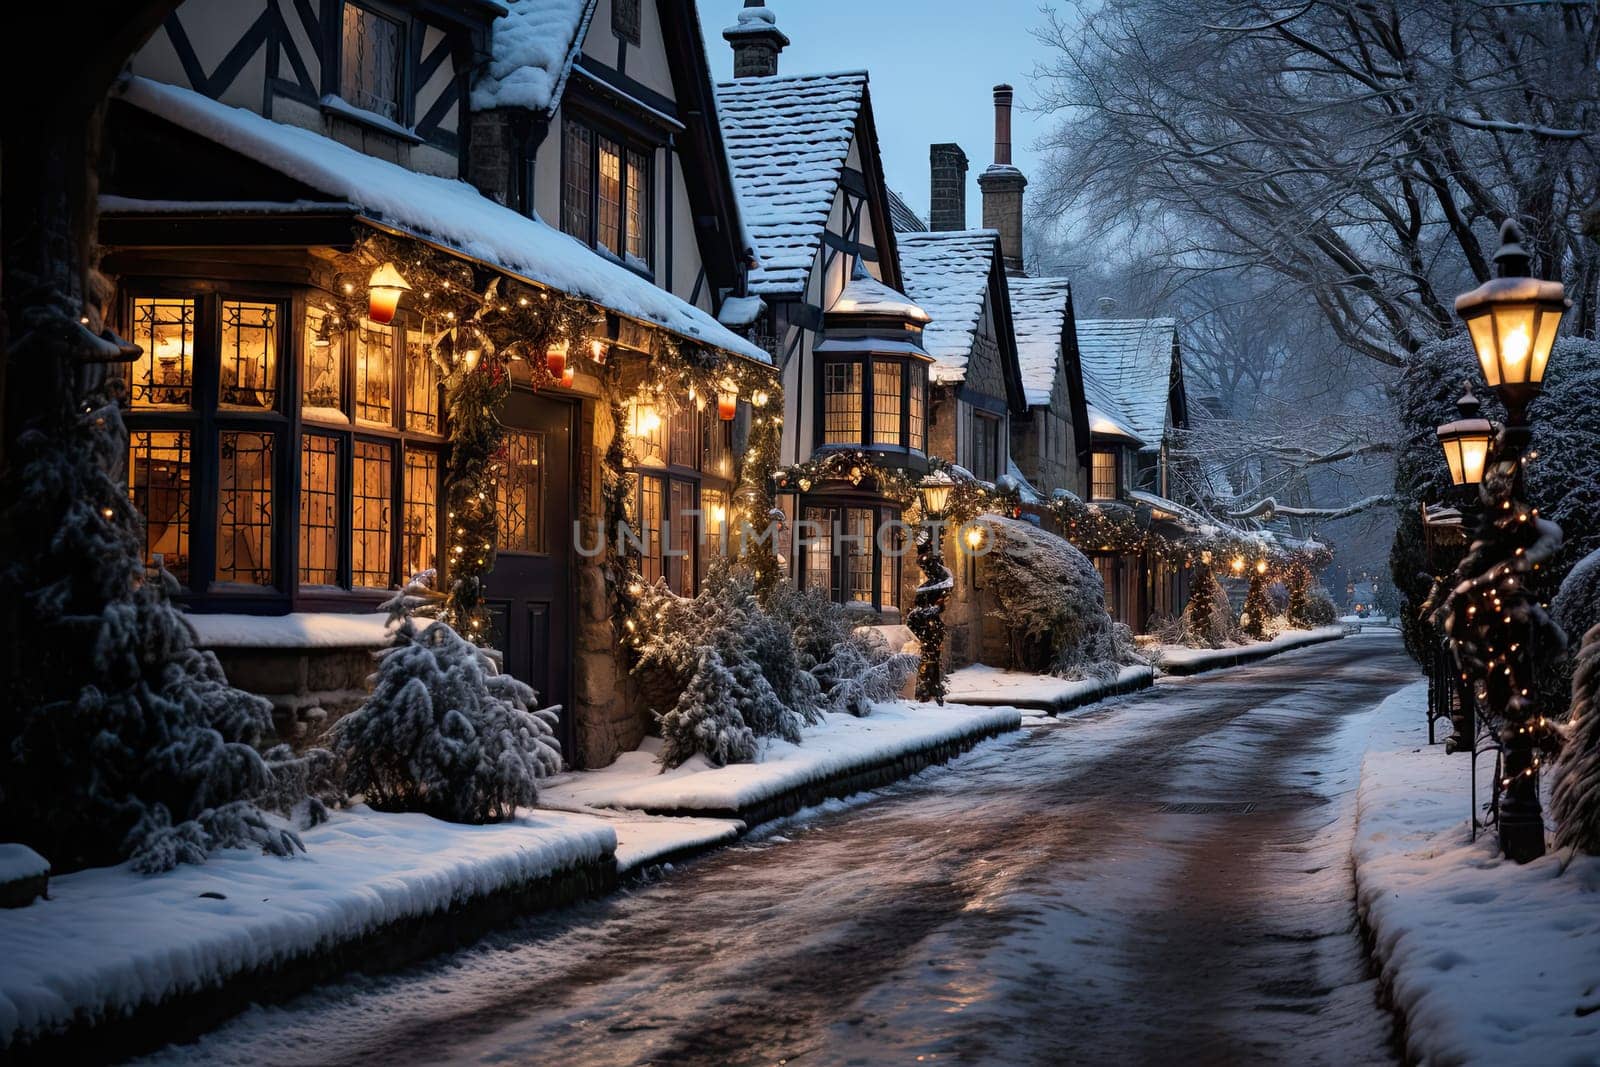 A Winter Wonderland: Festive Lights Illuminate Snowy Streets and Cozy Houses Created With Generative AI Technology